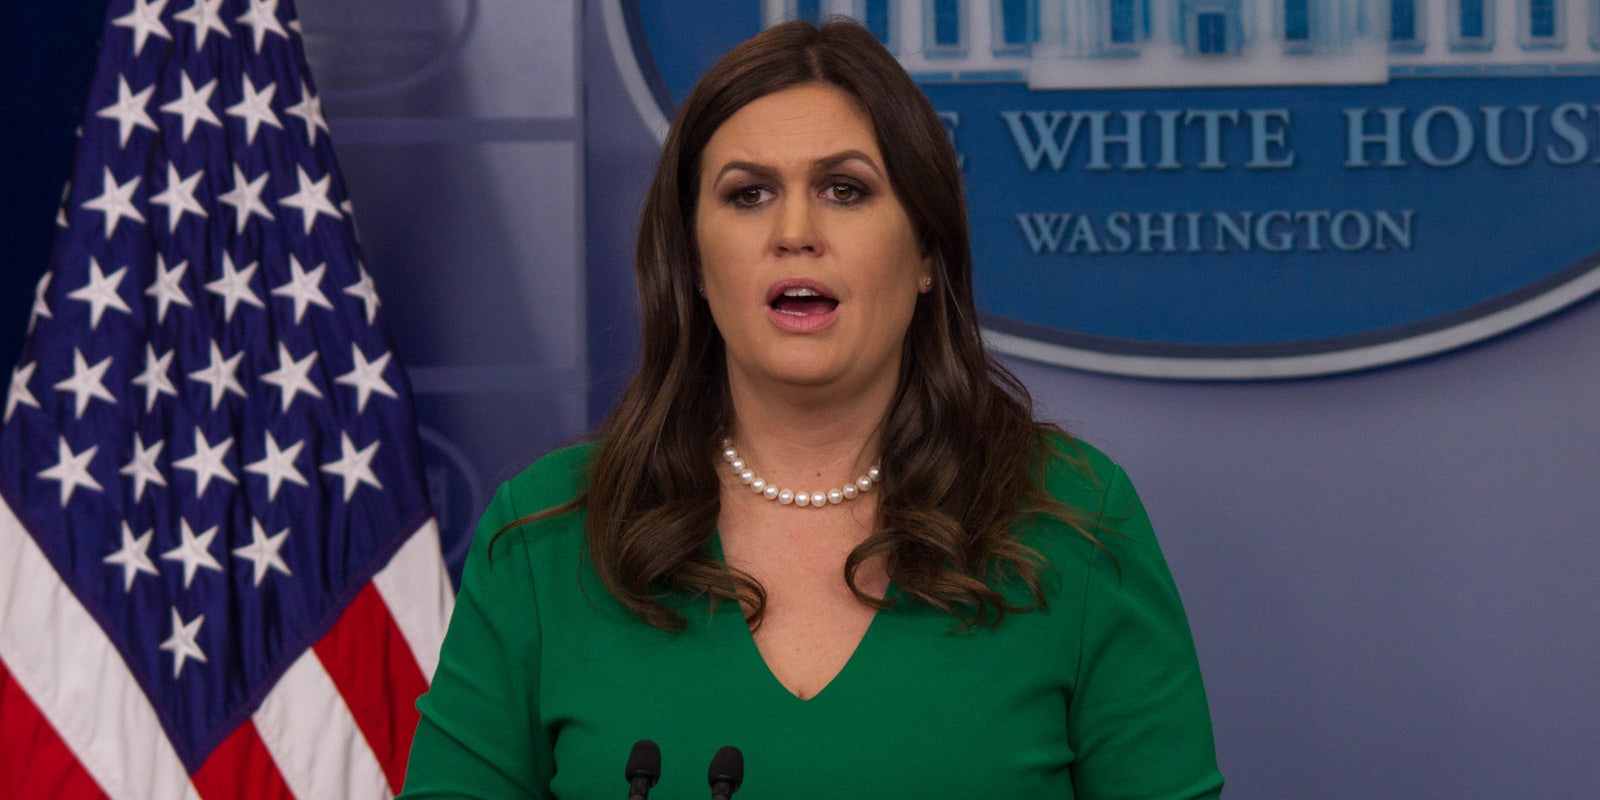 Sarah Huckabee Sanders speaking into microphones in front of blue background and American flag